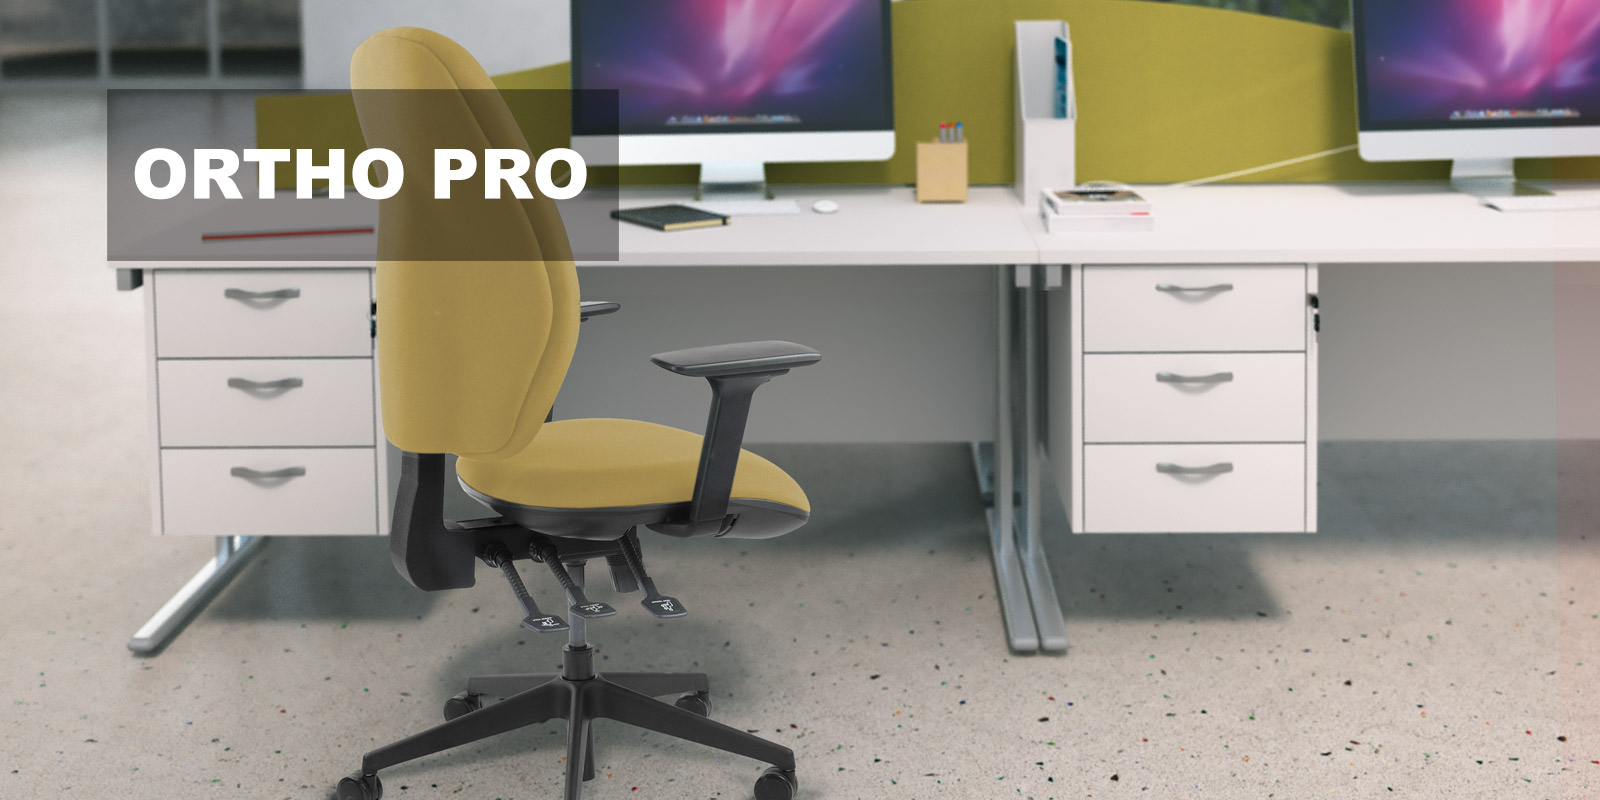 Orth pro seating family